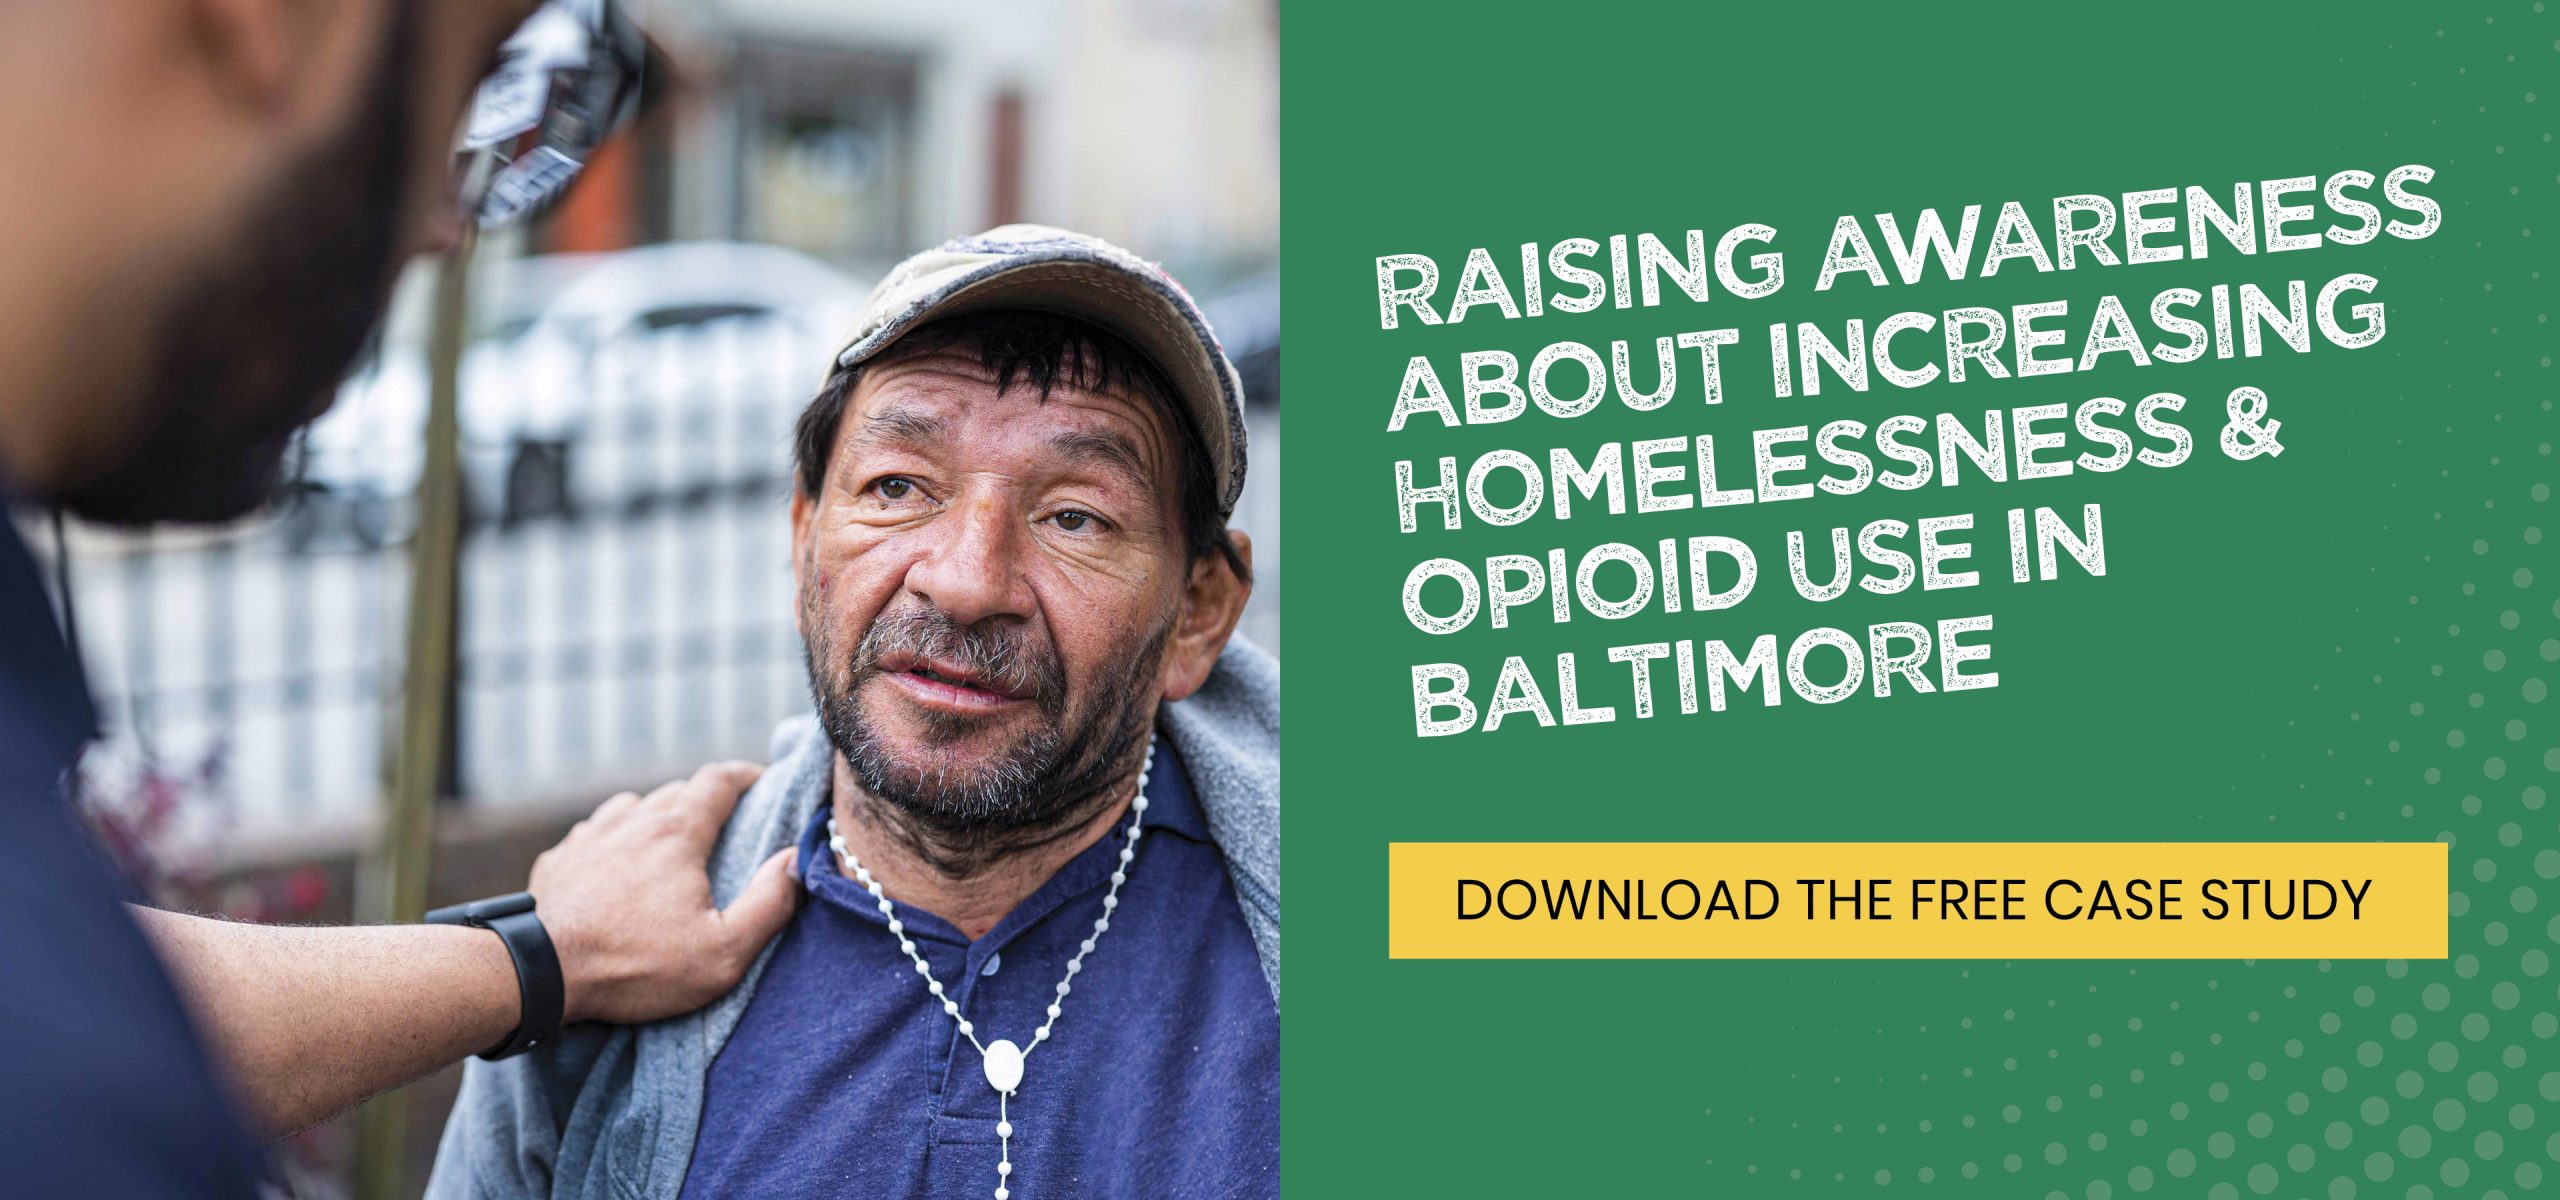 Raising awareness about increasing homelessness & opioid use in Baltimore